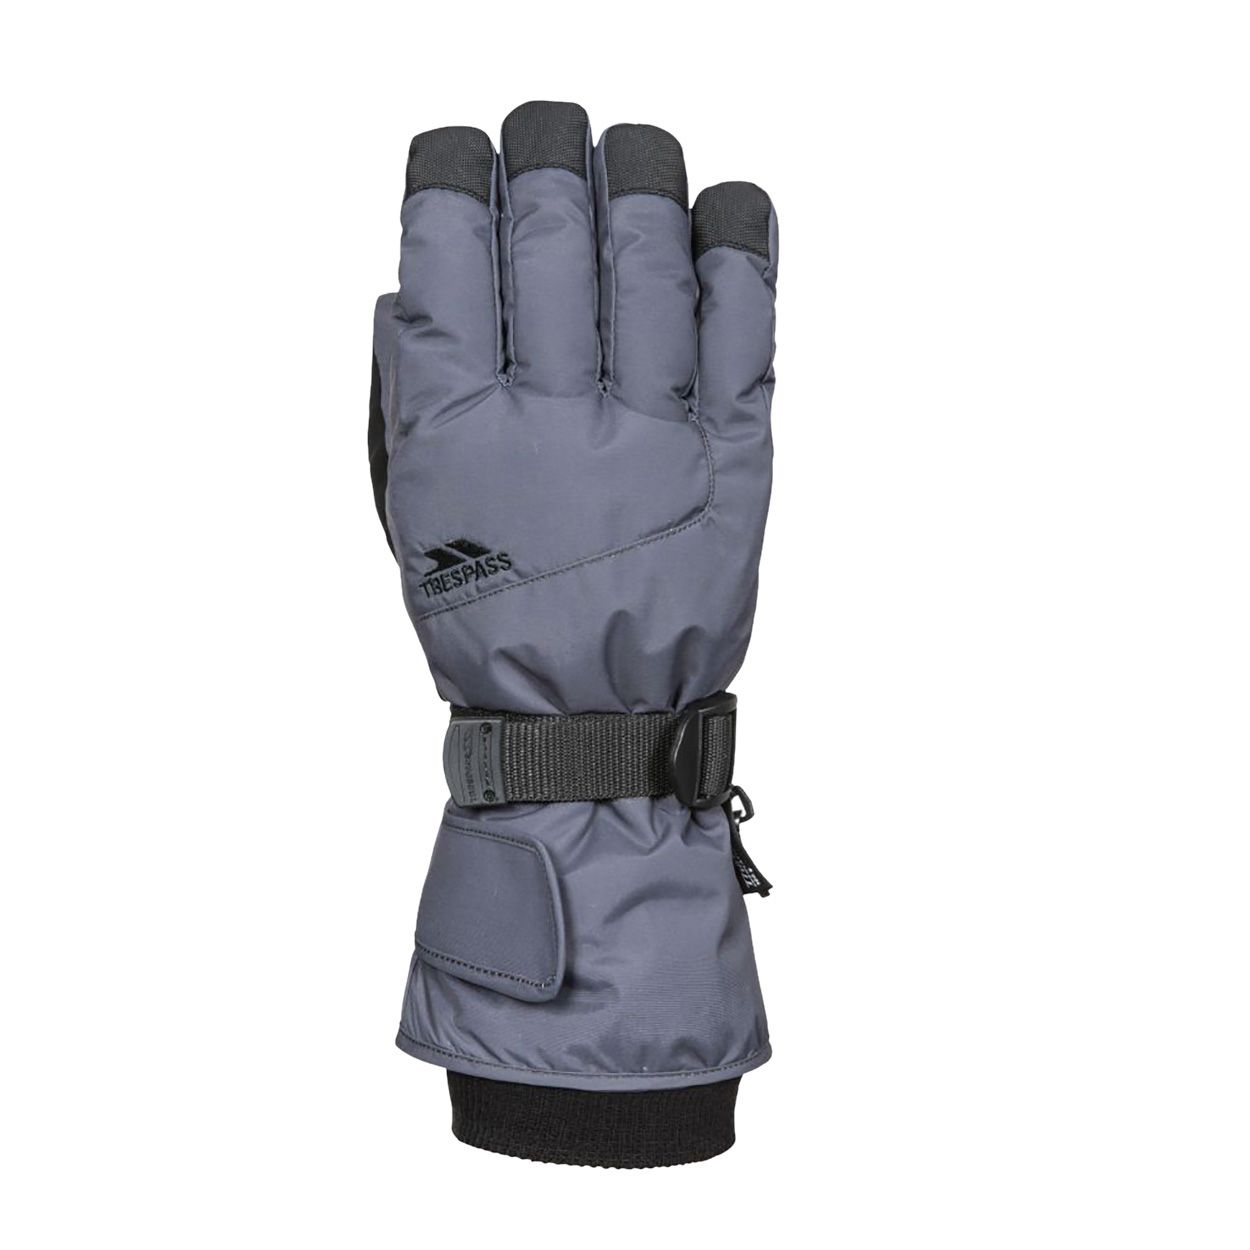 Unisex glove. Lightly padded. Adjustable wrist strap. Adjustable cuff tab. Glove retainer. Inner knitted cuff. Nose wipe. Waterproof, breathable. Shell: 100% Polyamide, Palm: 100% Polyurethane, Lining: 100% Polyester, Insulation: 3M Thinsulate.